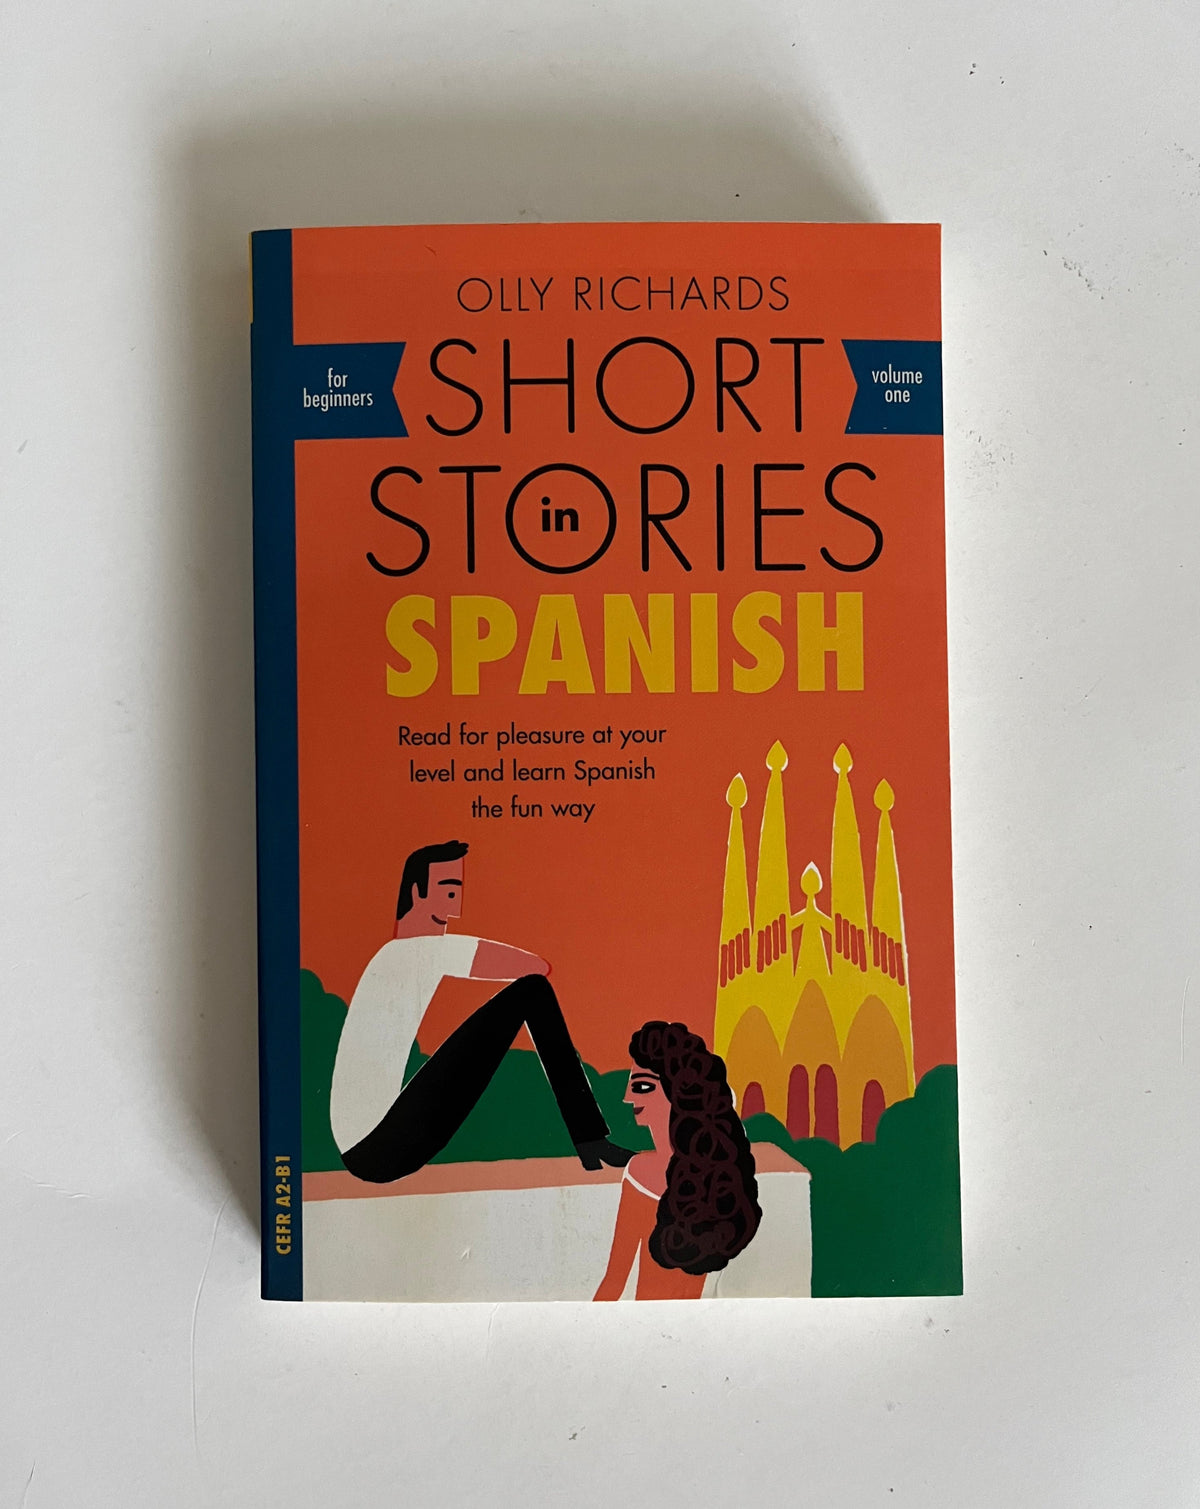 Short Stories in Spanish: For Beginners by Olly Richards